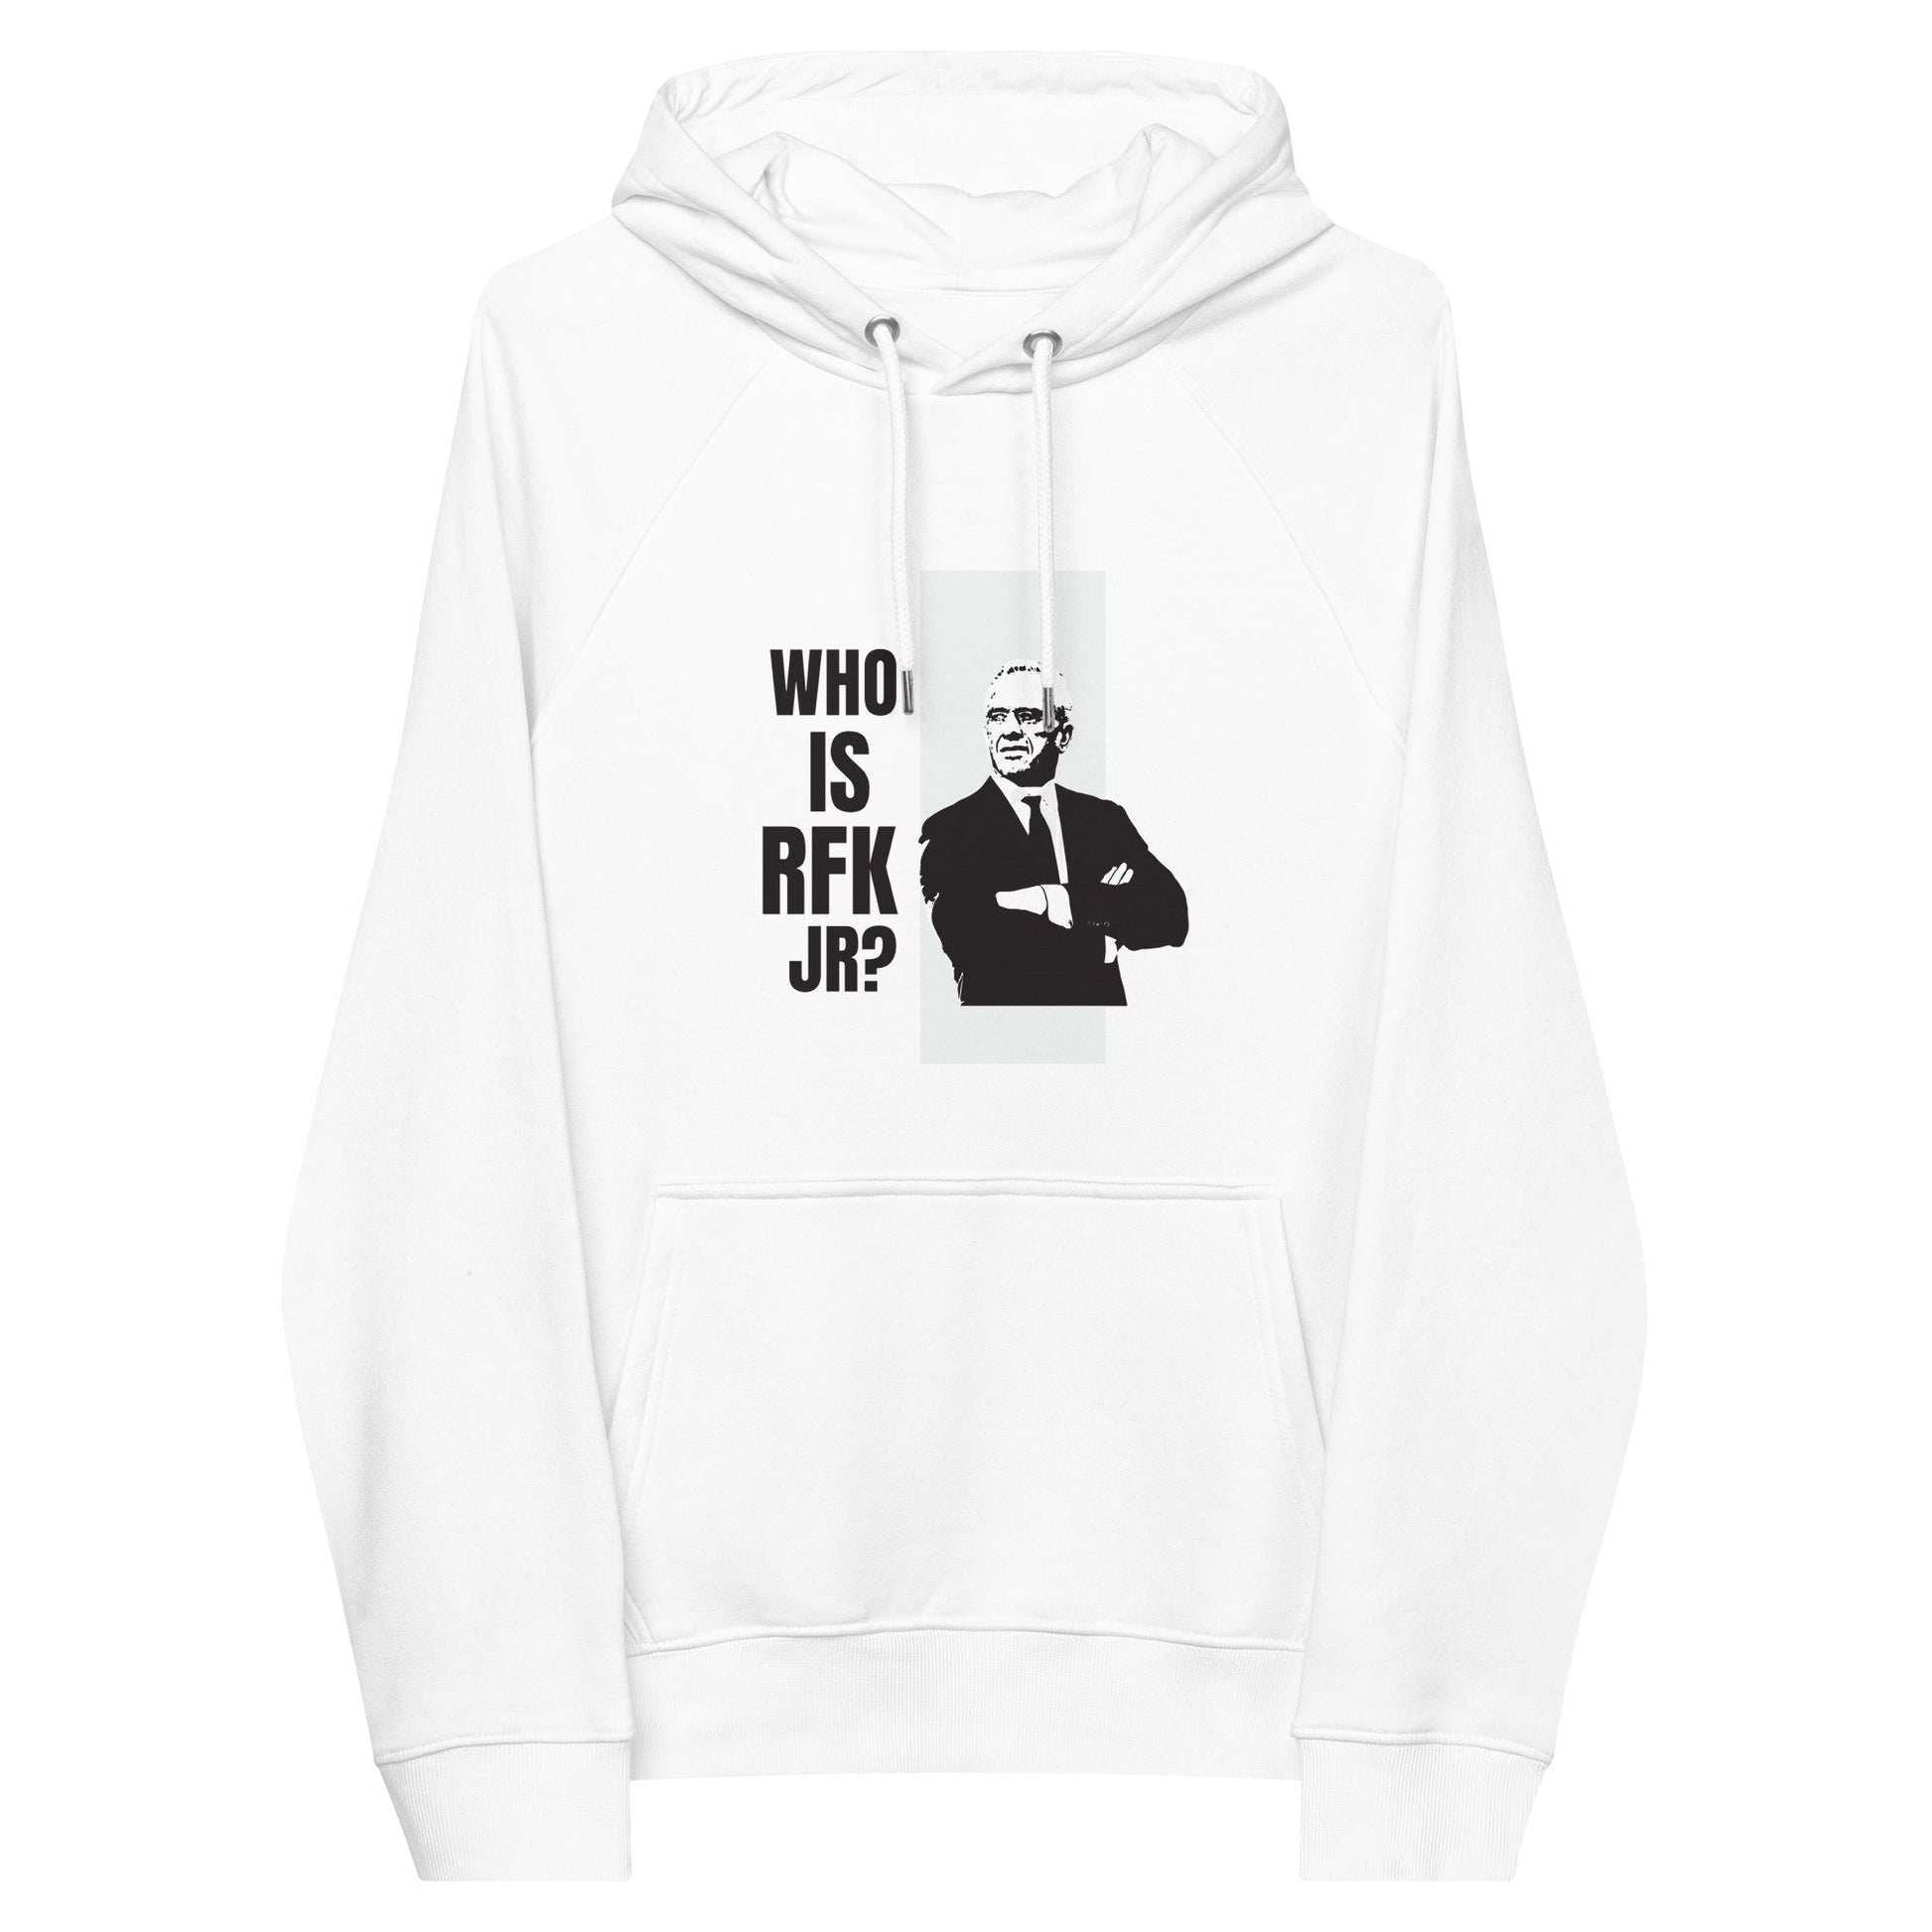 Who is RFK Jr? Unisex Hoodie - TEAM KENNEDY. All rights reserved